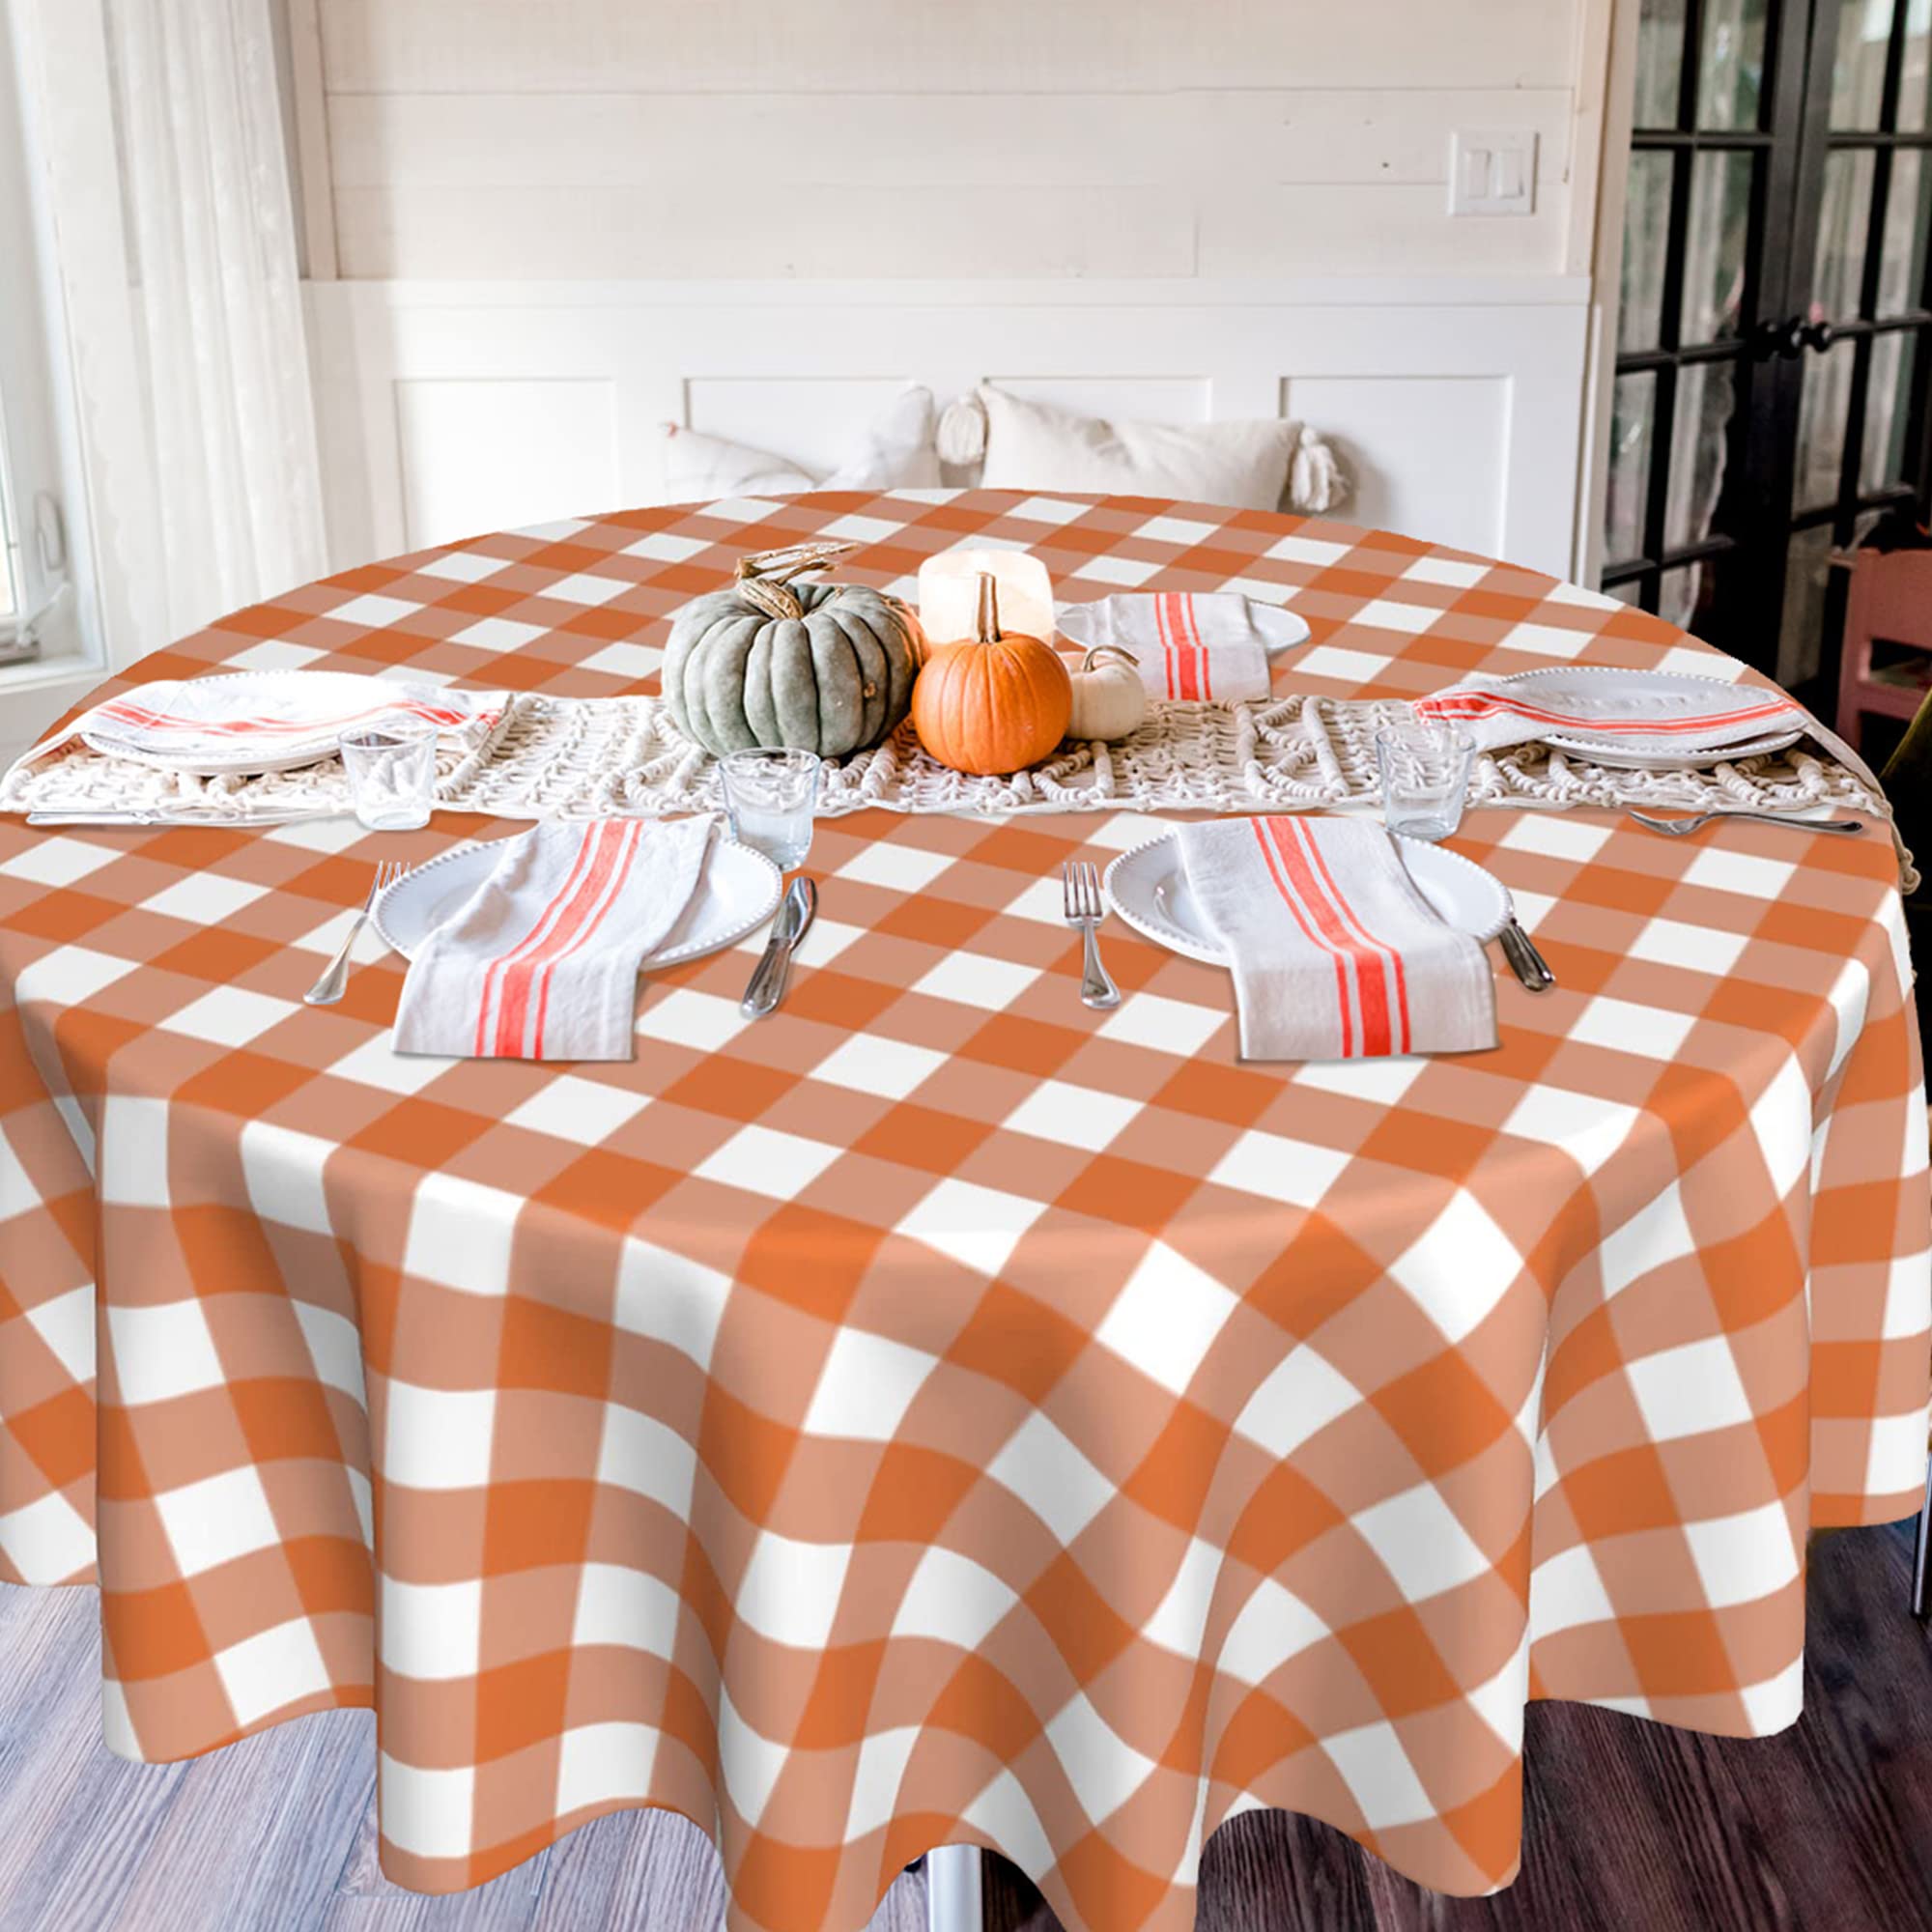 SuQKXCo Fall Round Tablecloth Orange White Autumn Buffalo Plaids Table Cloth 60 inch Thanksgiving Table Cloths Cover Mat Spill Proof Table Covers for Kitchen Party Dinner Tabletop Decoration